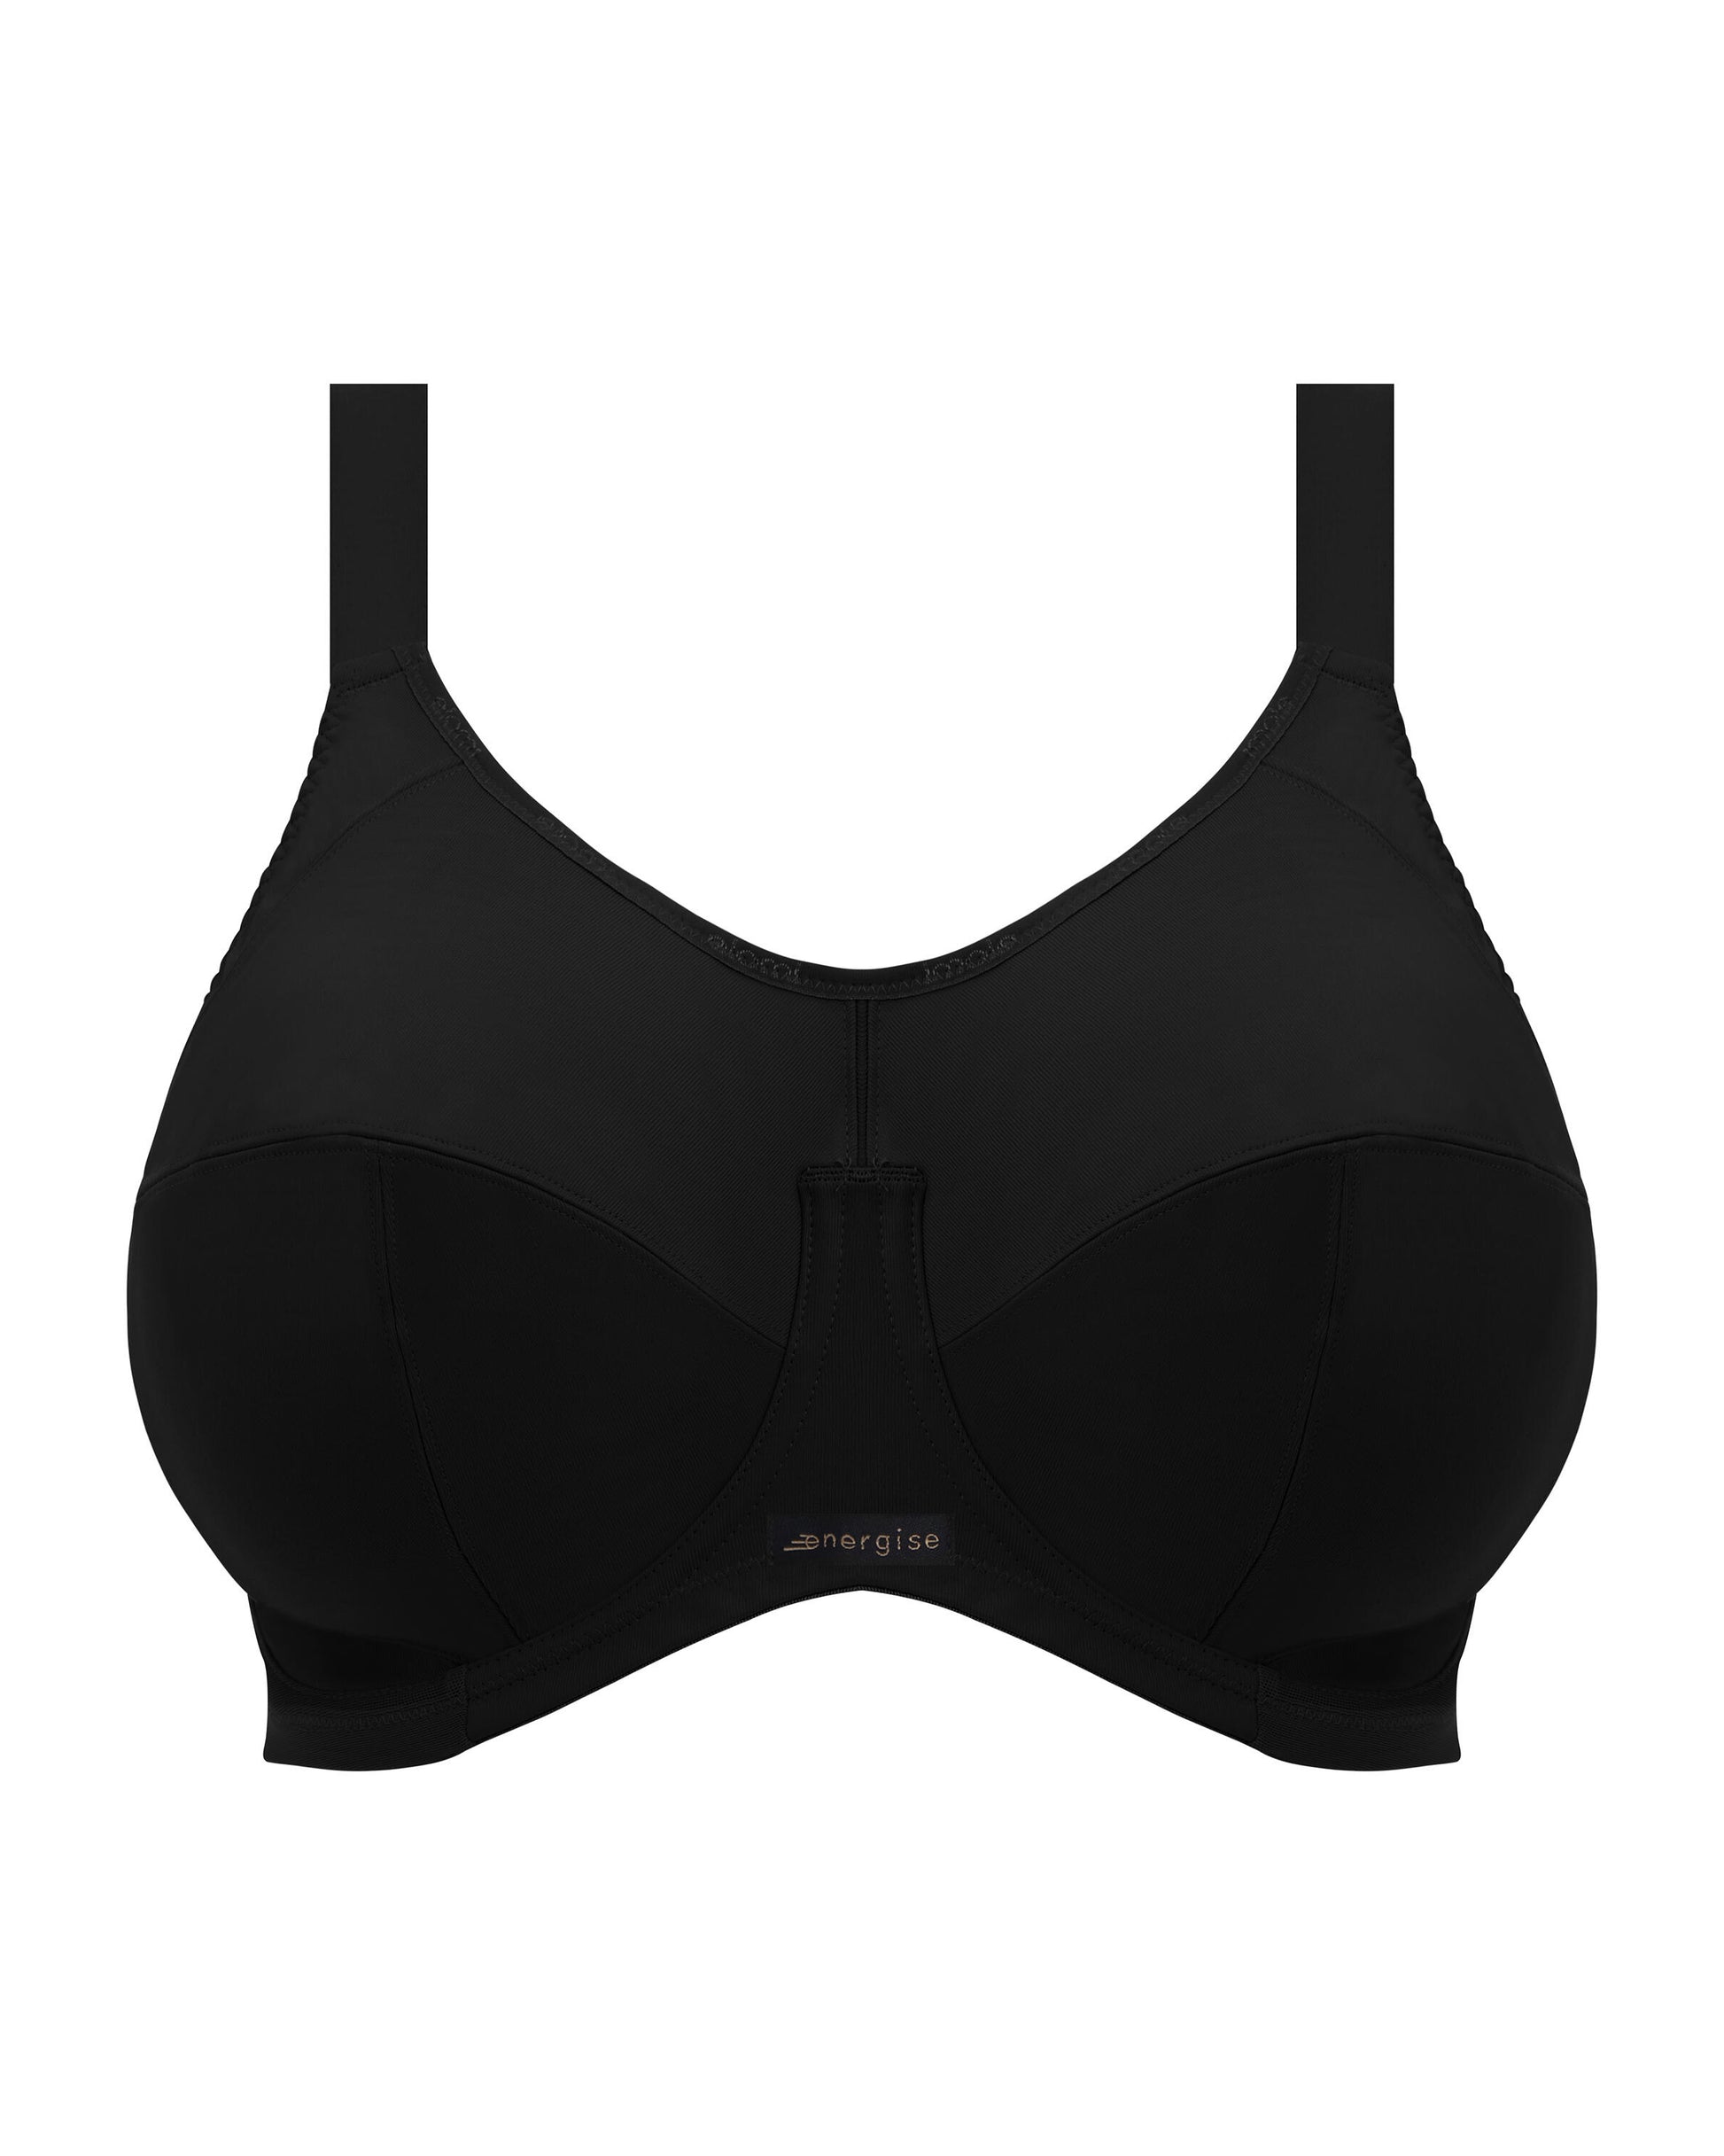 Flat lay of an underwire sports bras in black